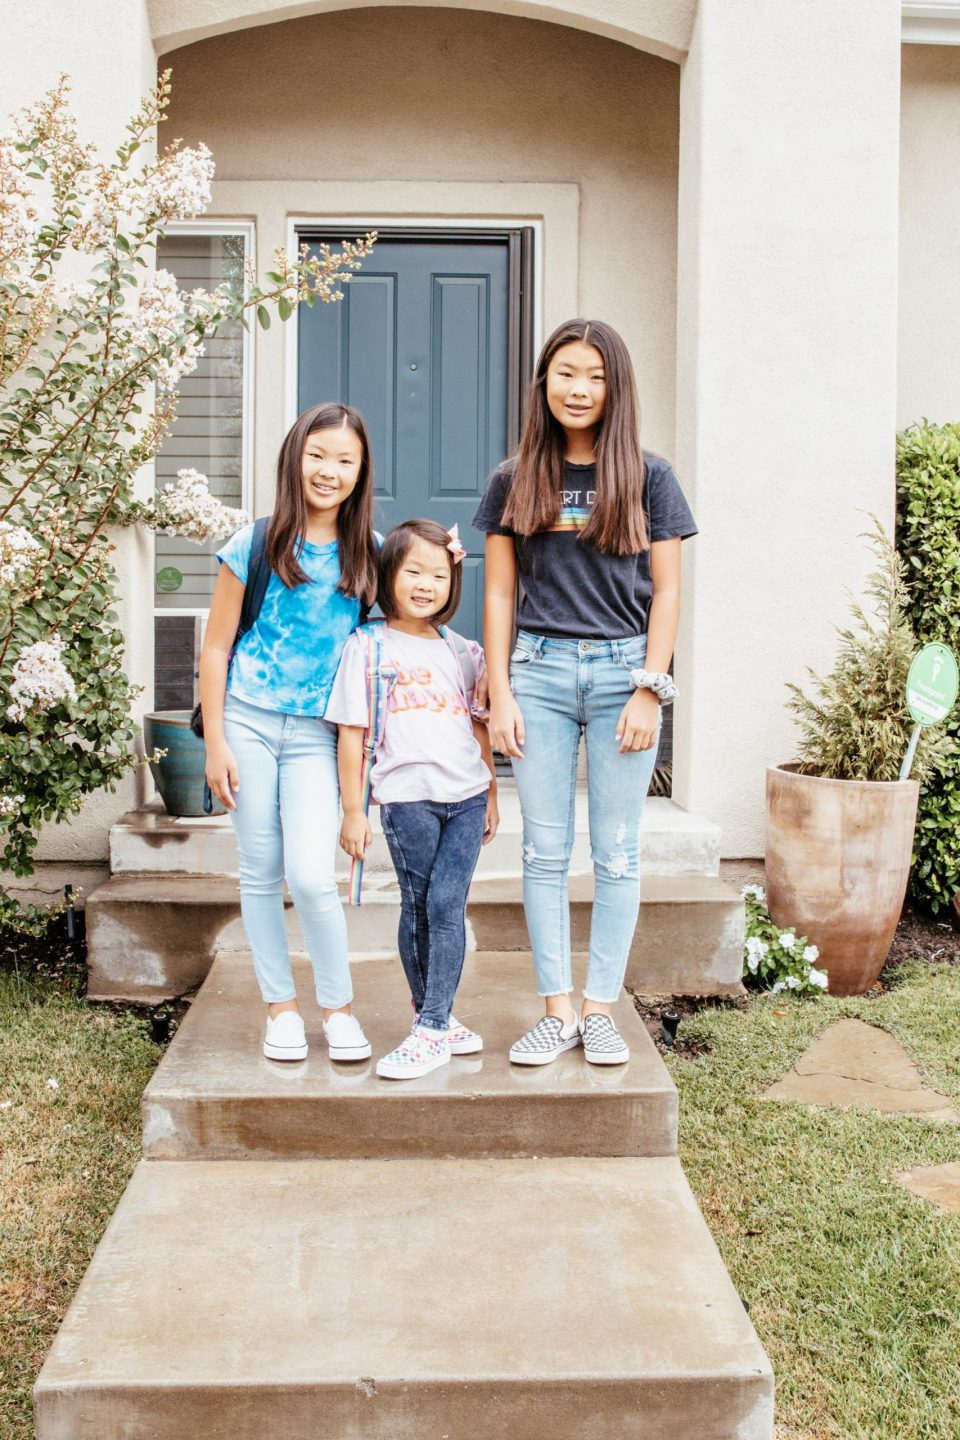 The girls' back to school photo from 2019